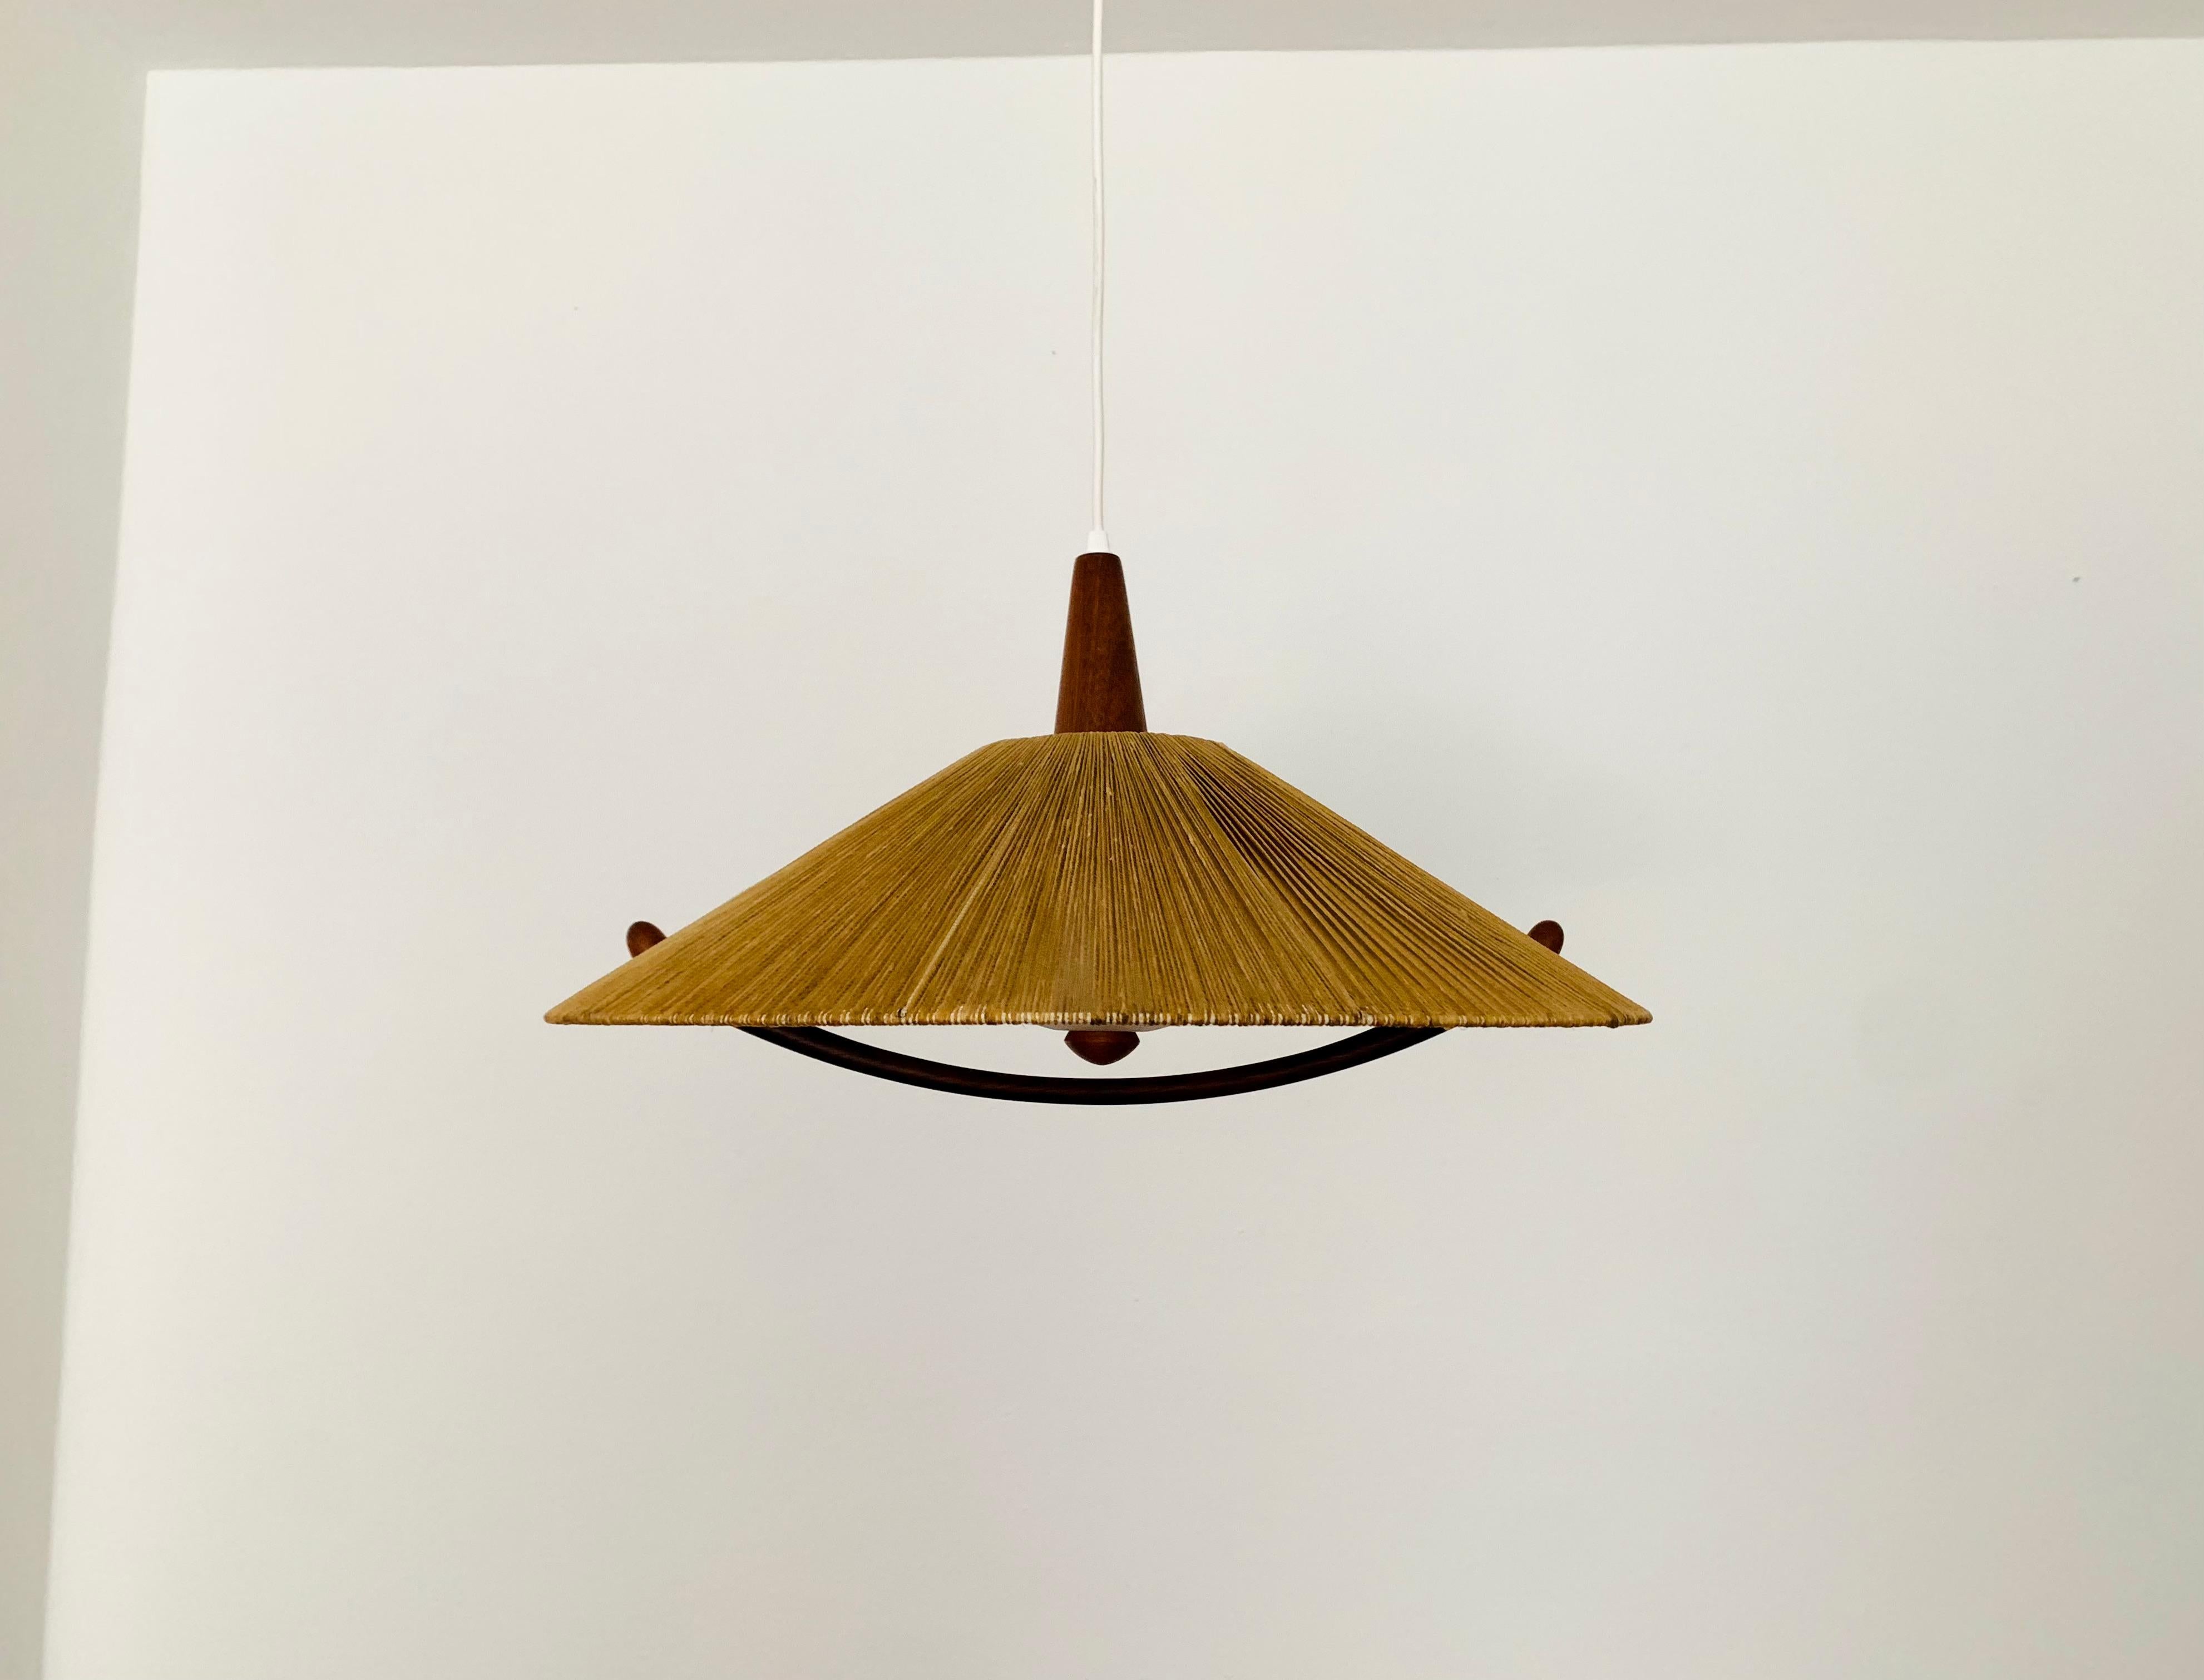 Exceptionally beautiful and large pendant lamp from the 1960s.
The design is very unusual.
The shape and the materials create a warm and very pleasant light.
The teak details are beautifully shaped.

Condition:

Very good vintage condition with